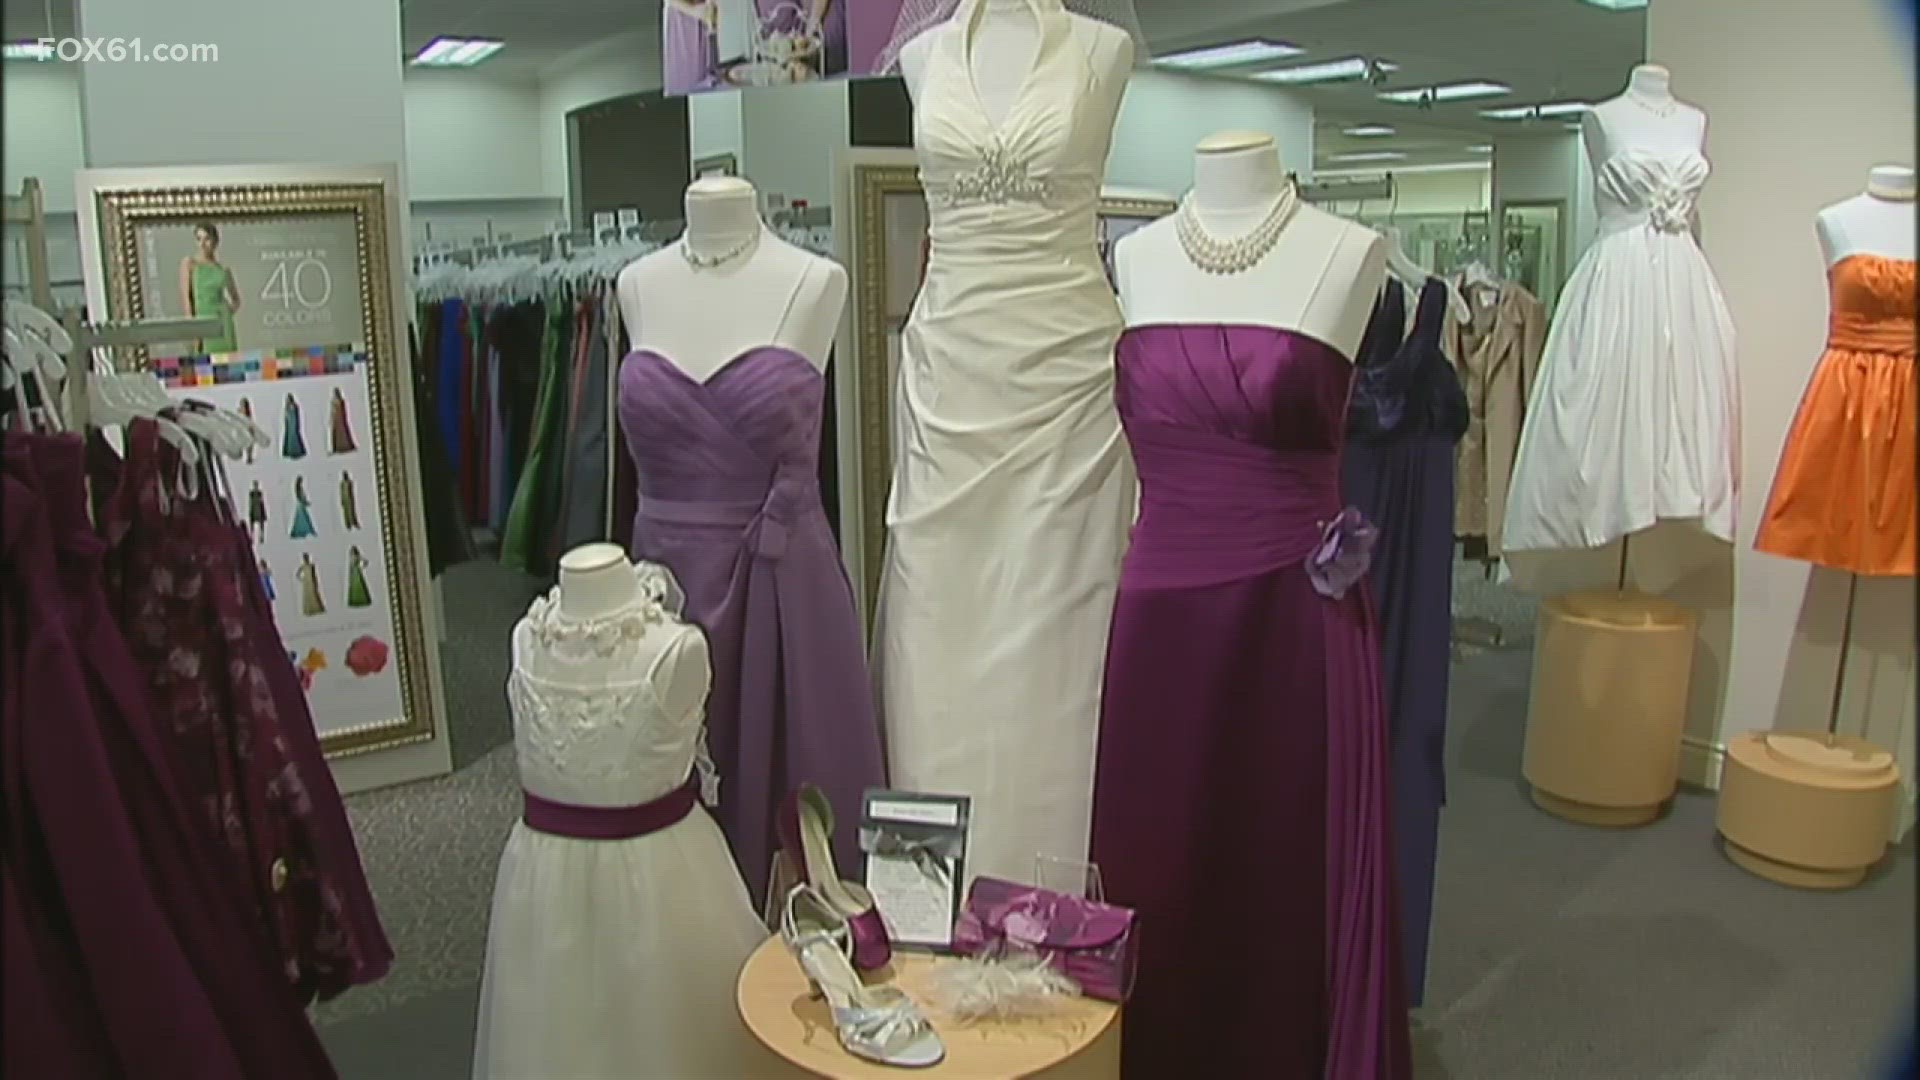 This is the second time in five years that the bridal shop files for bankruptcy.